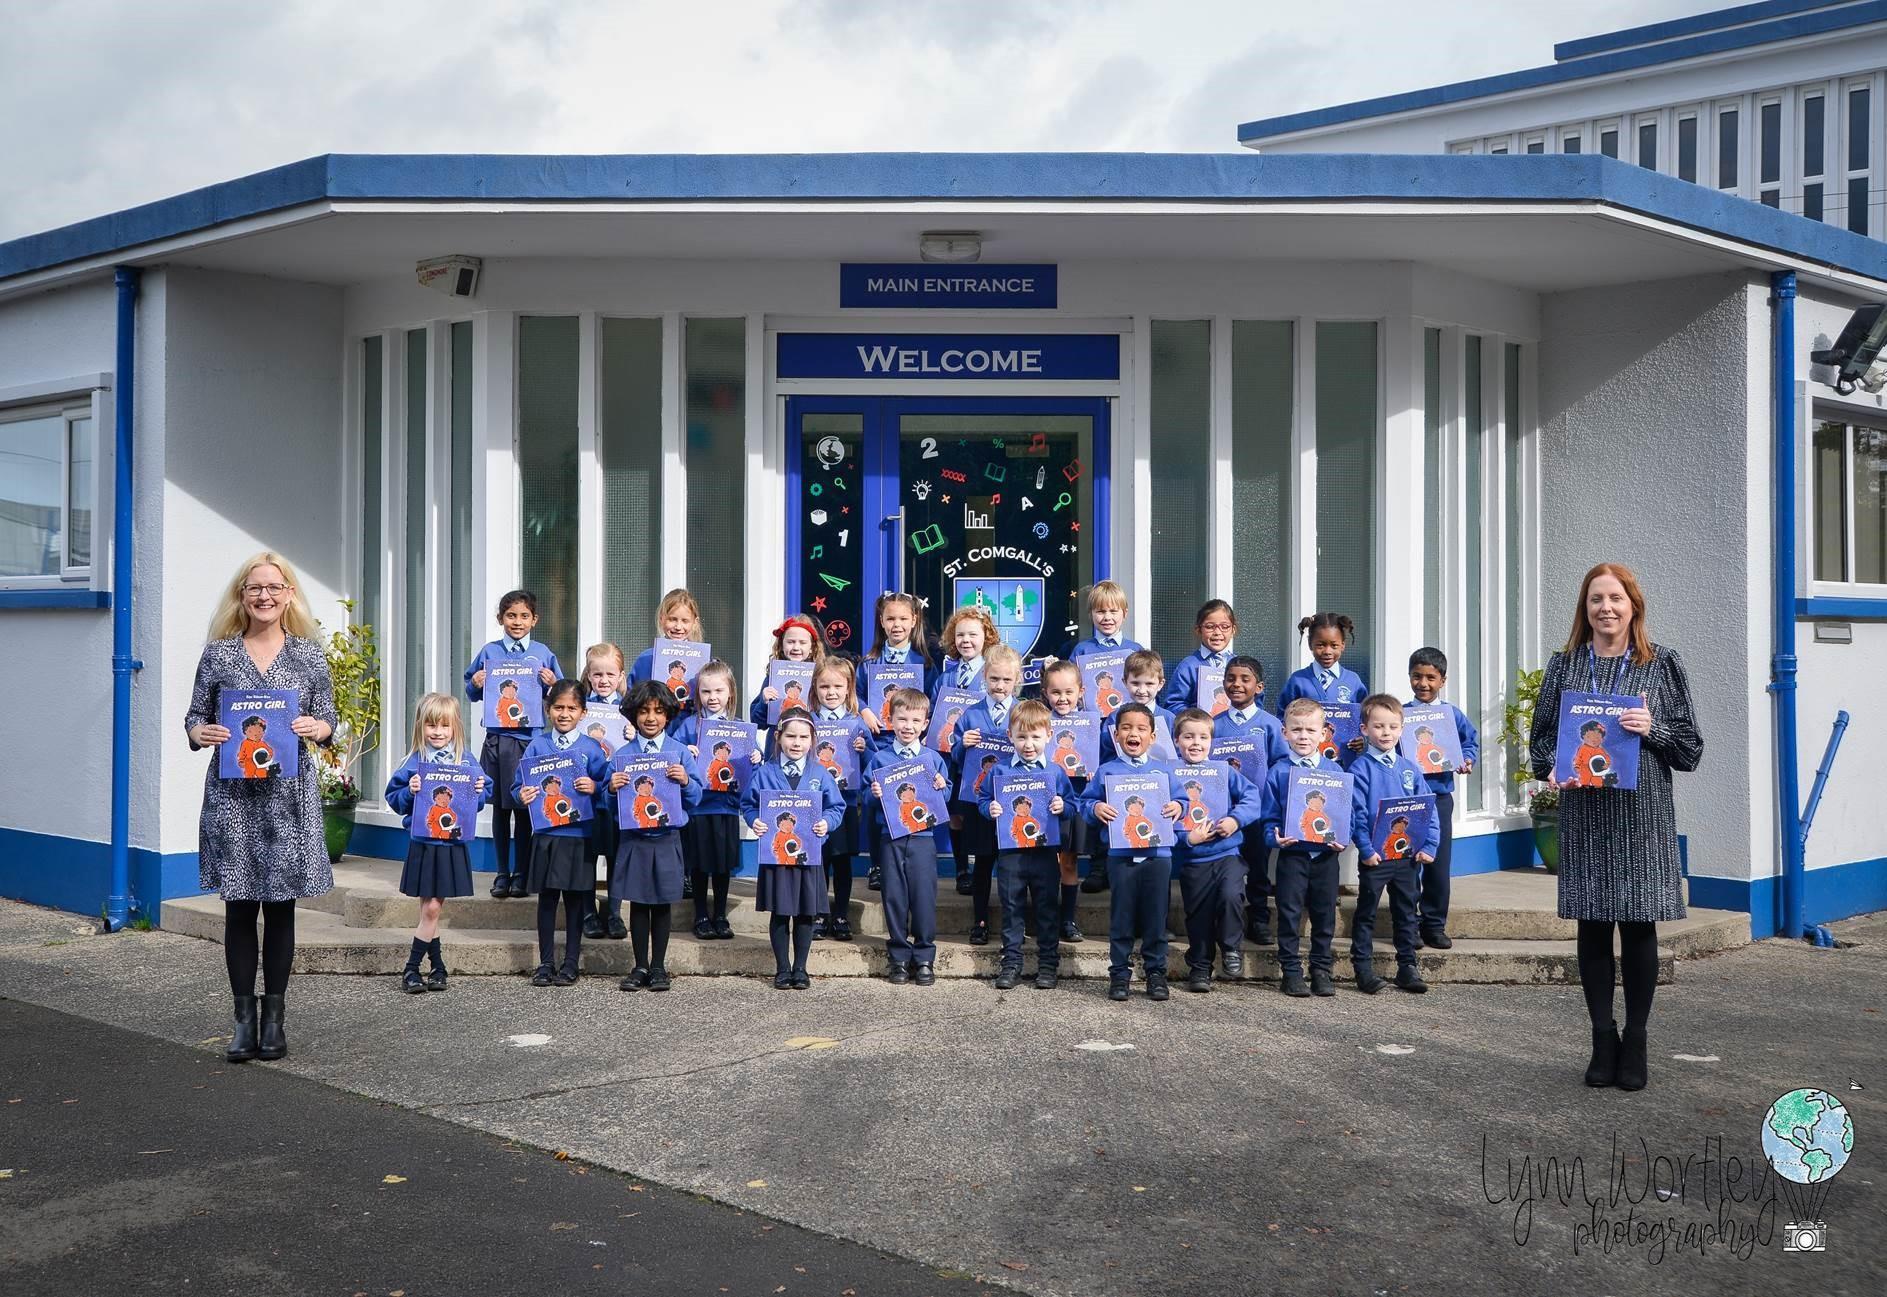 Airport Boost Aerospace Dreams with St Comgall’s Primary School